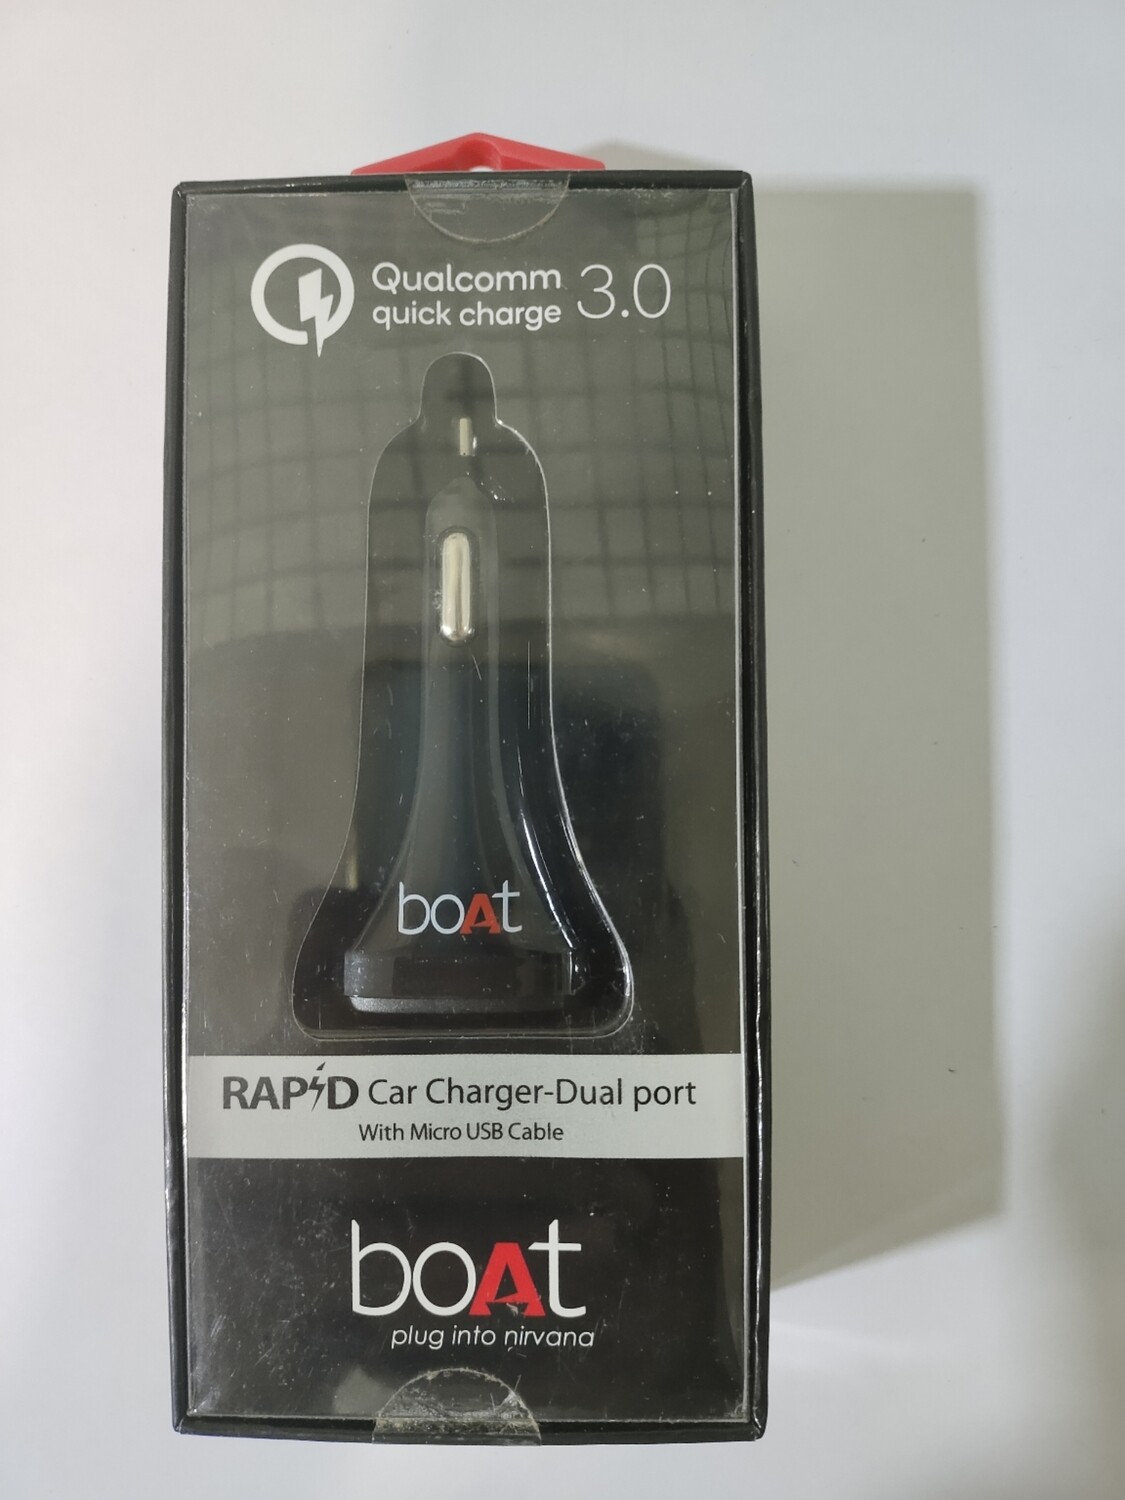 boAt Dual Port Rapid Car Charger + Micro USB Cable